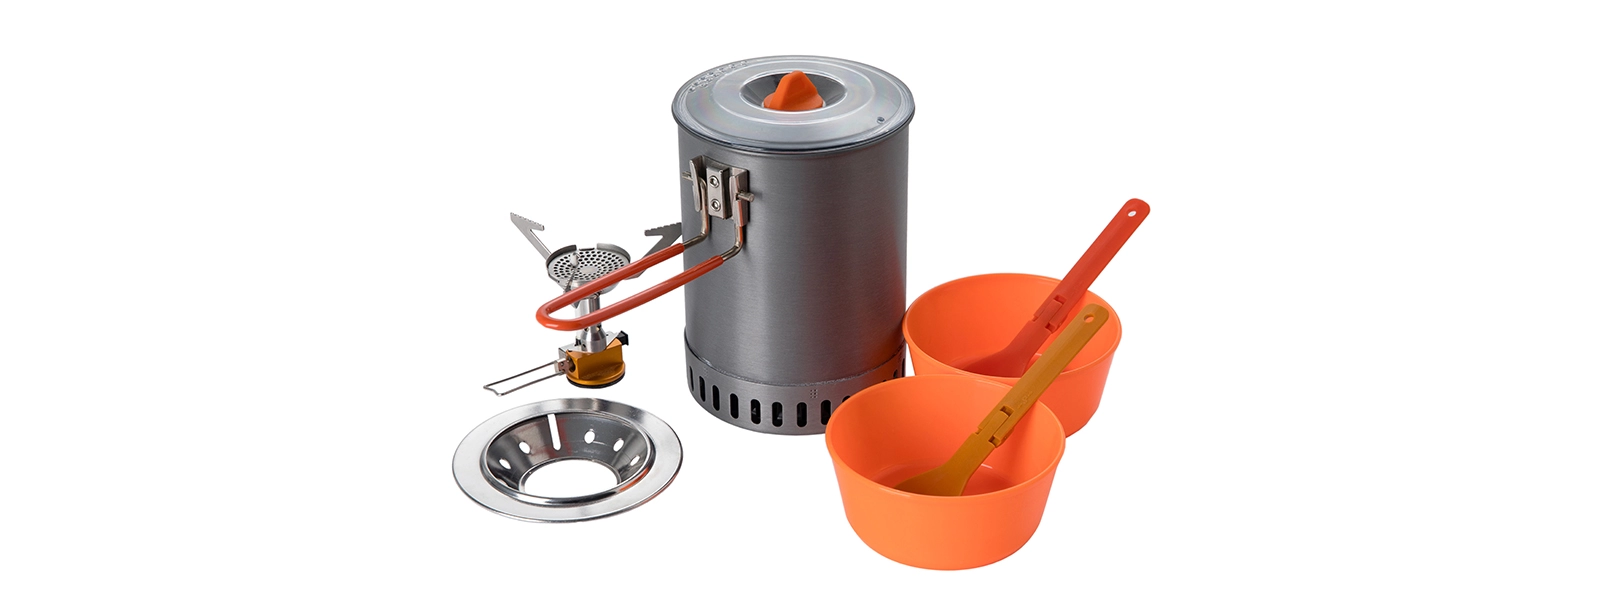 details of Compact Cooking Stove and Cookware Set With Windshield